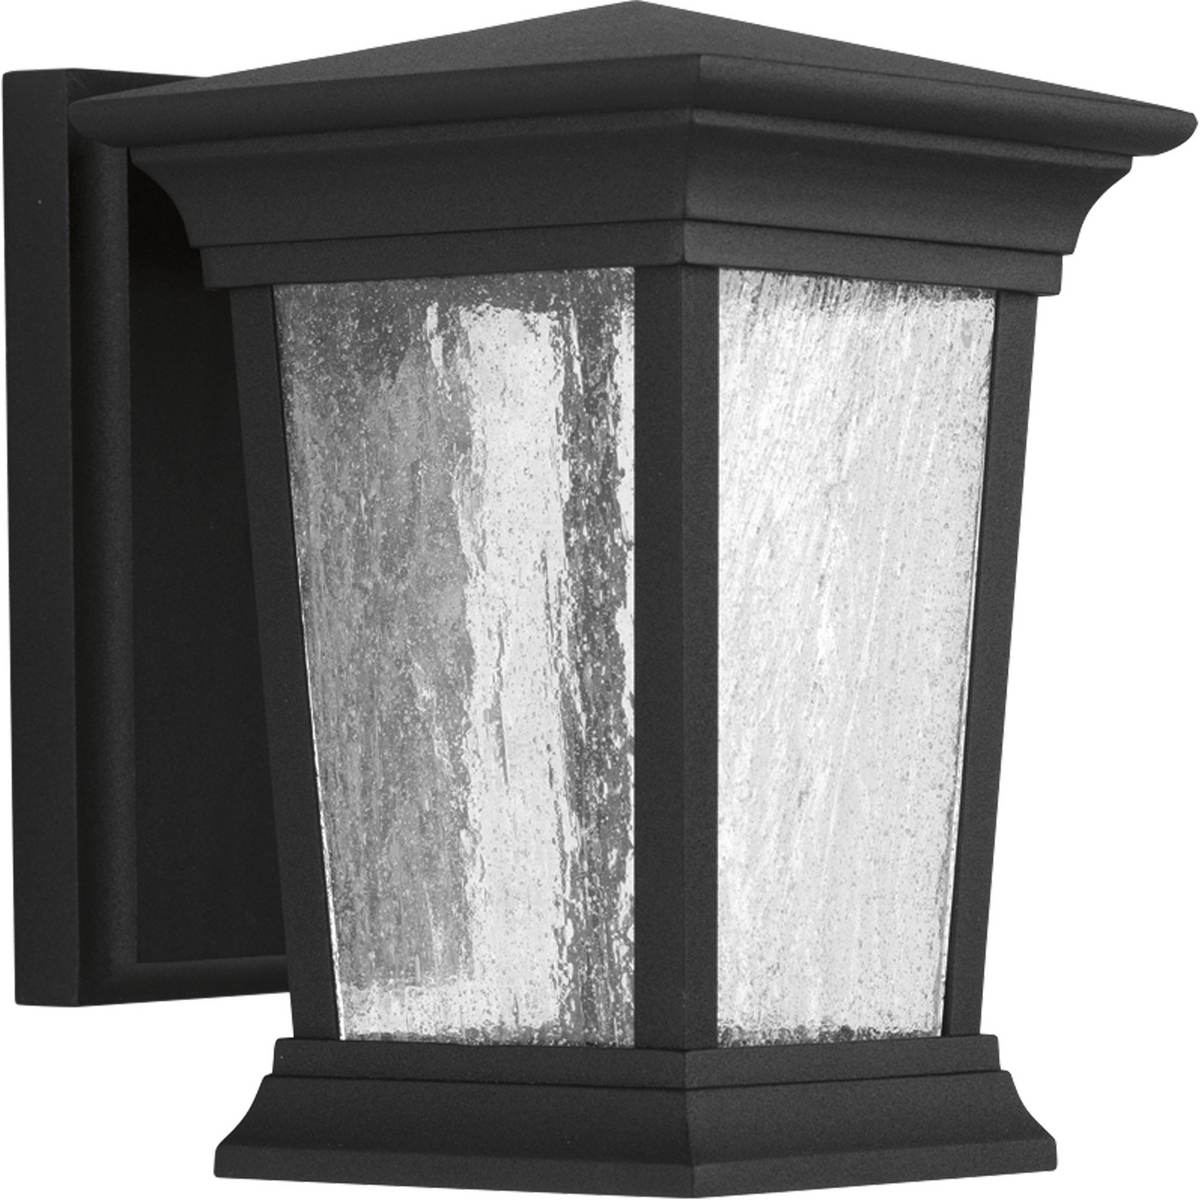 Arrive LED lanterns feature a die-cast aluminum, powder coated frame and heavily textured glass. One-light small wall lantern. 90+ CRI, 3000K, 623 lumens (source). Energy Star.